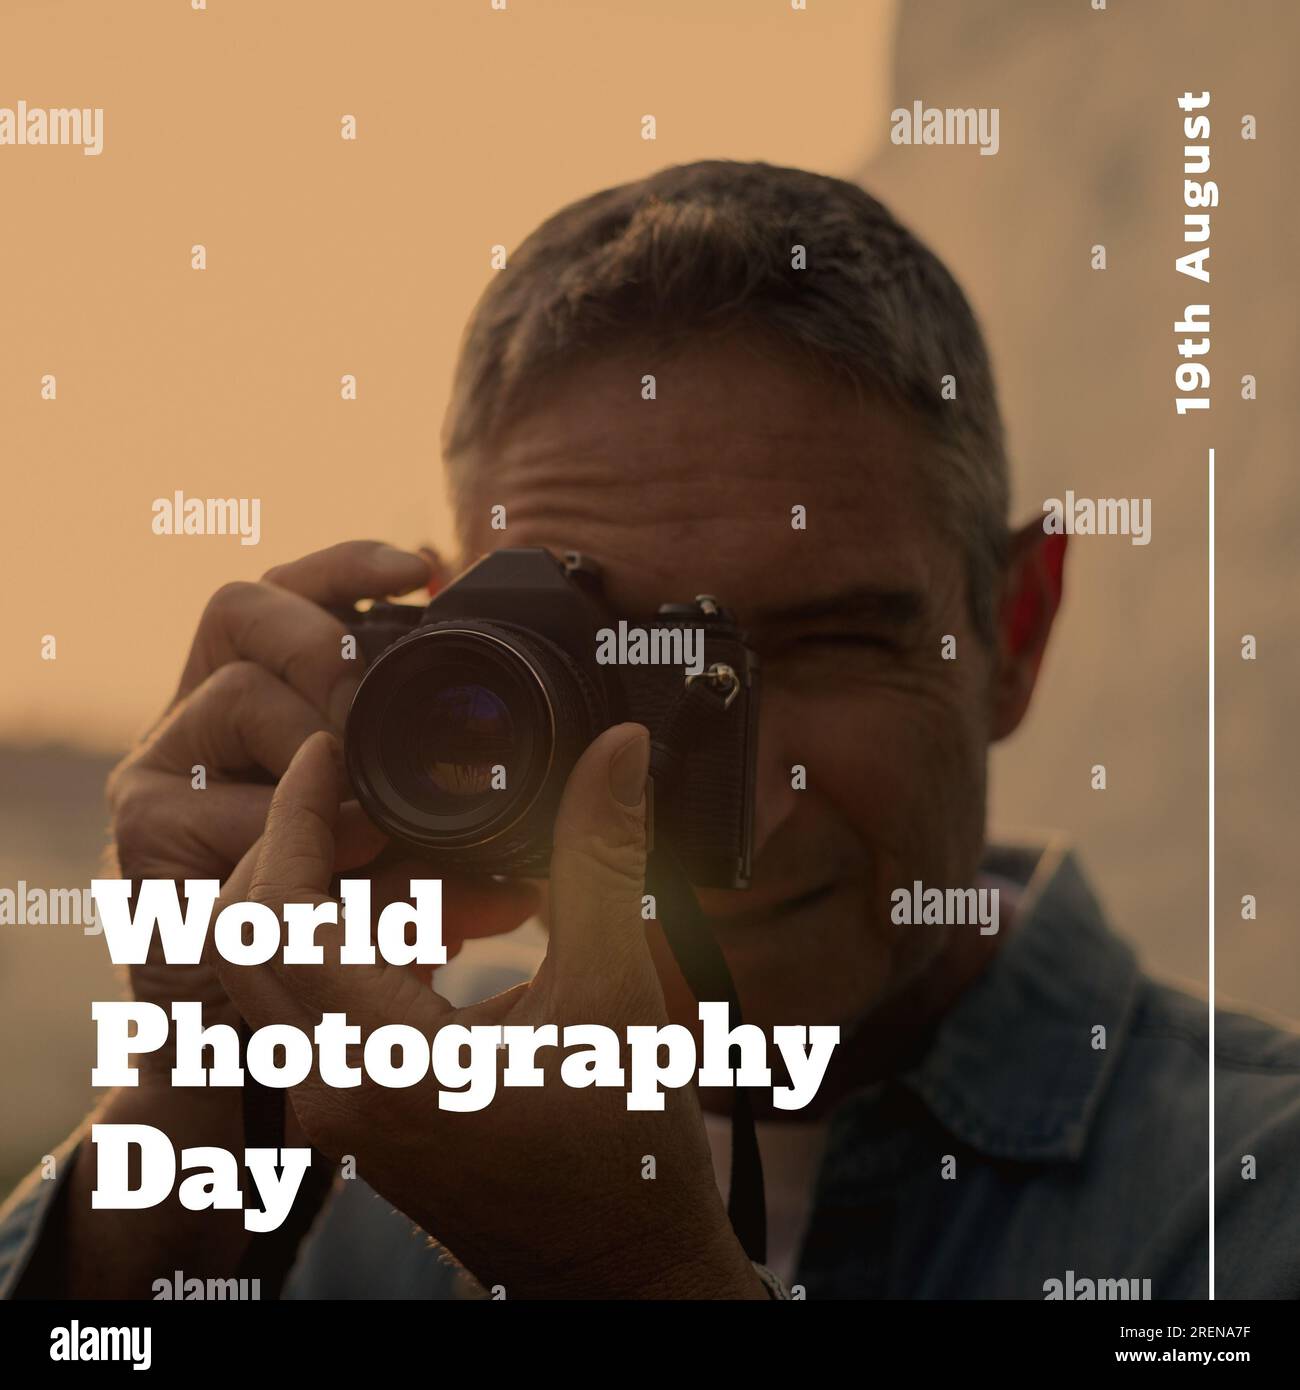 World photography day text and date in white over caucasian man using camera Stock Photo